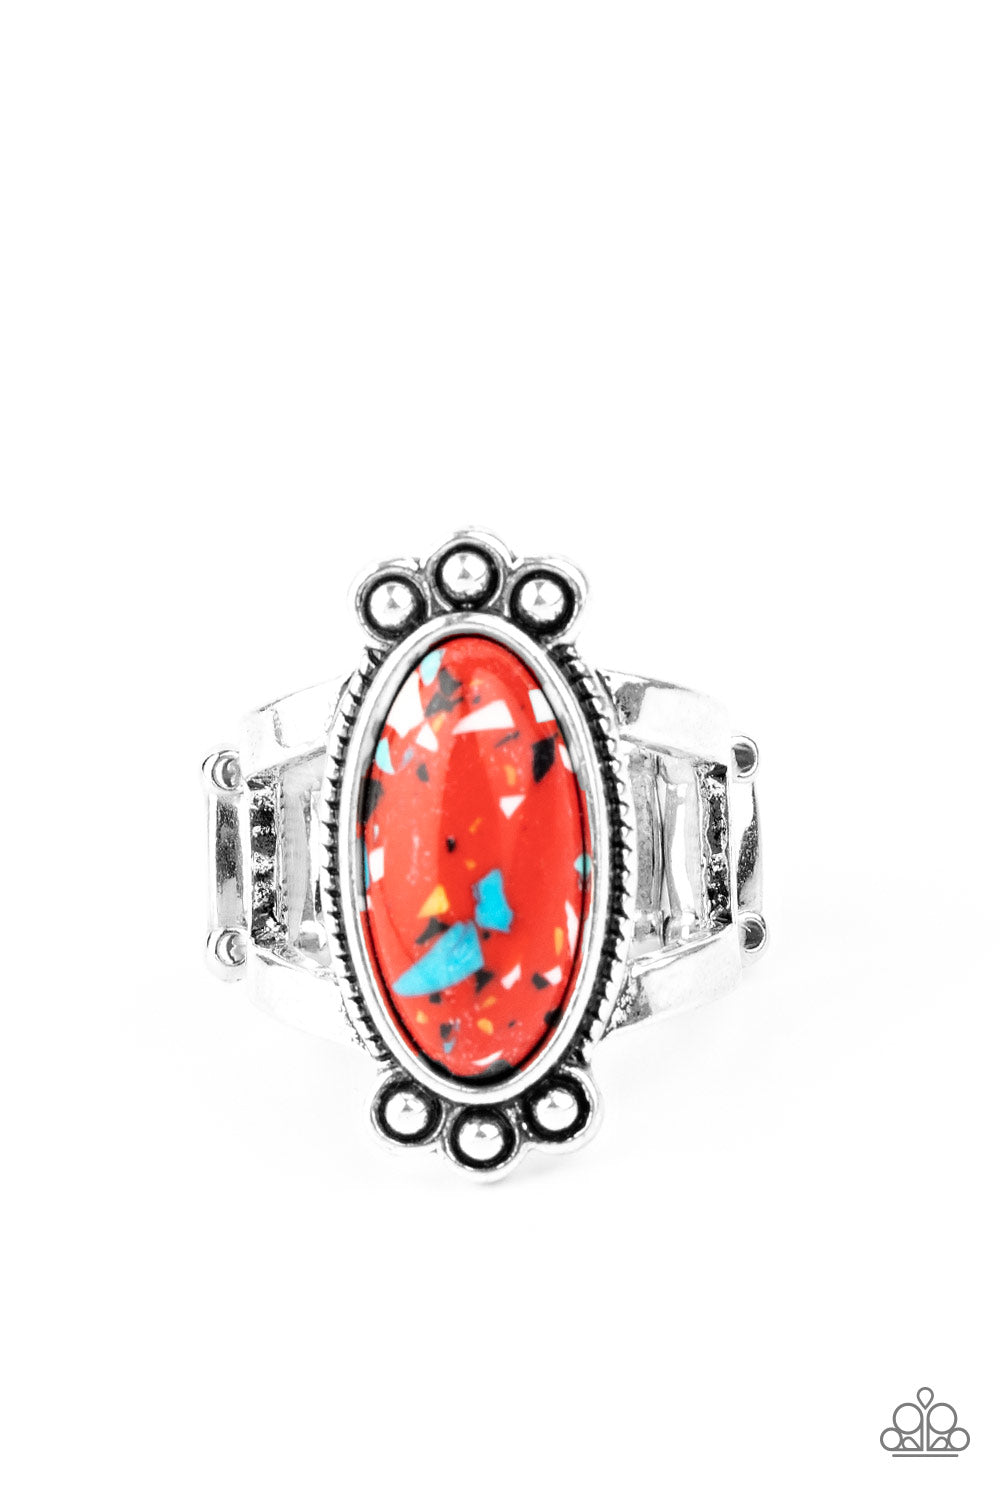 Psychedelic Deserts Ring - Red